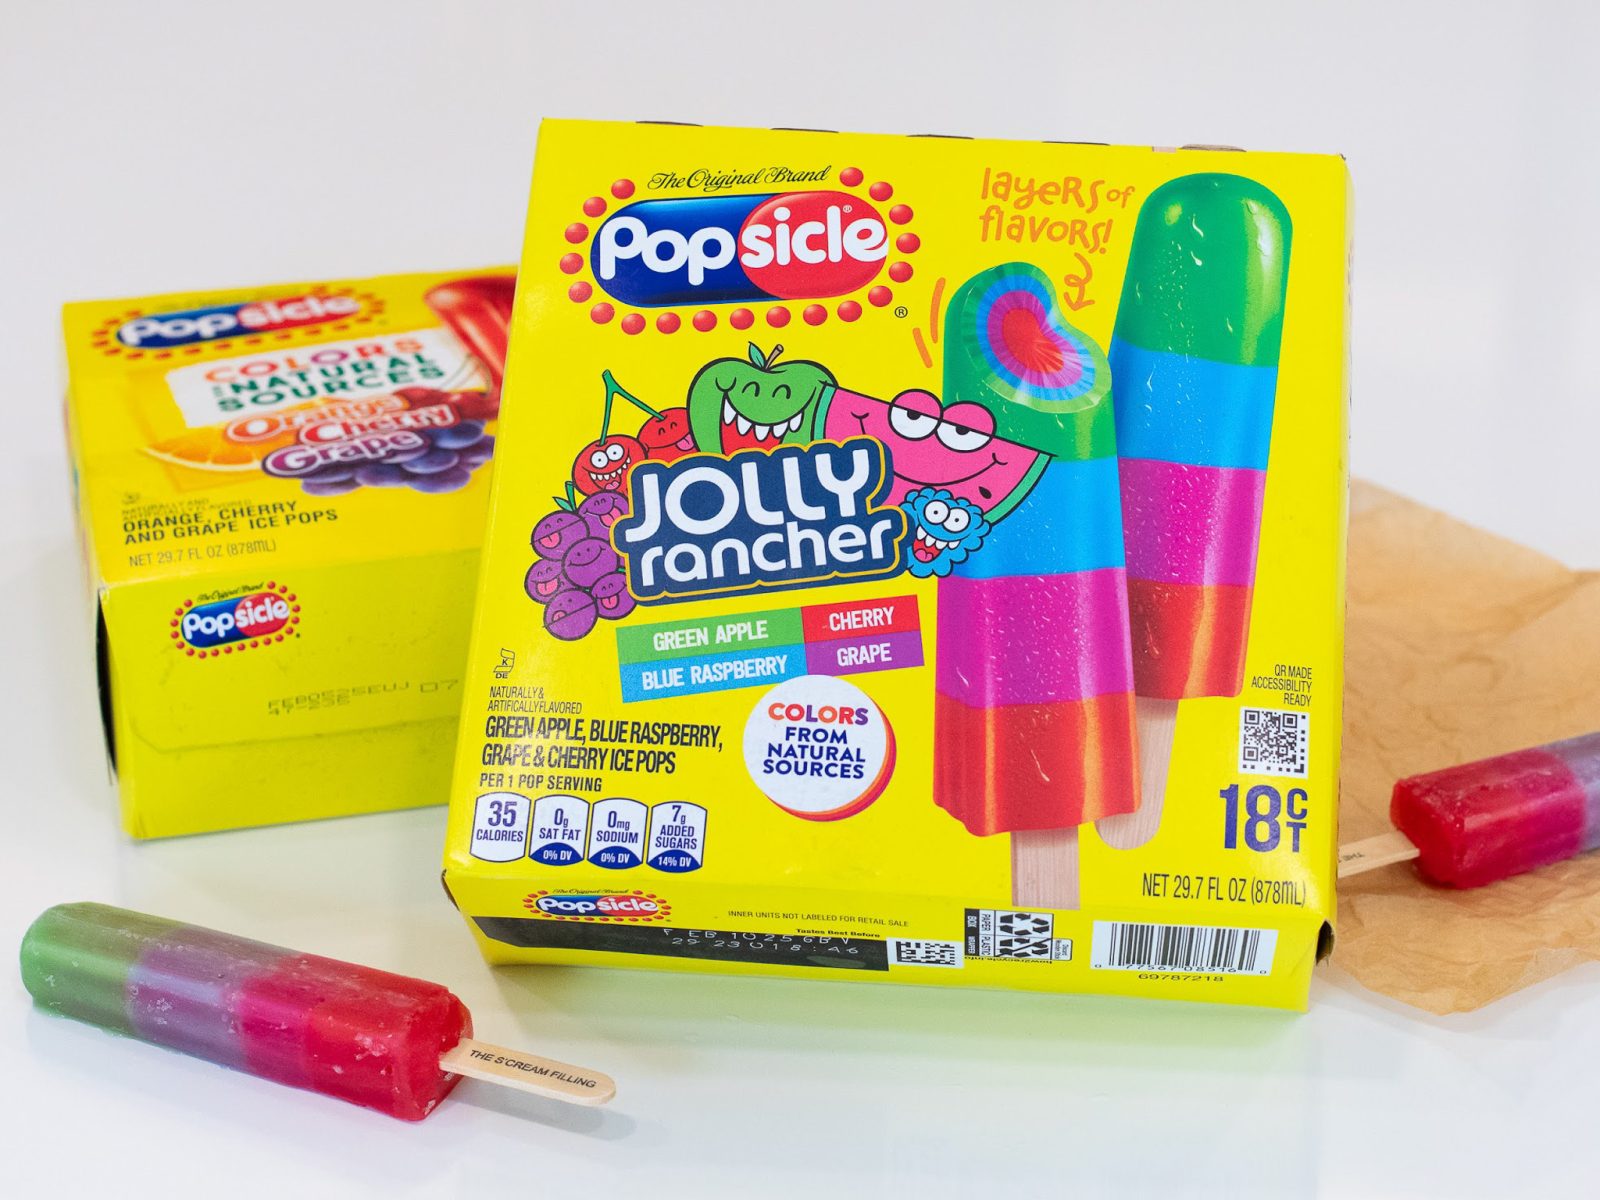 Popsicle Ice Pops As Low As $2.99 Per Box At Kroger